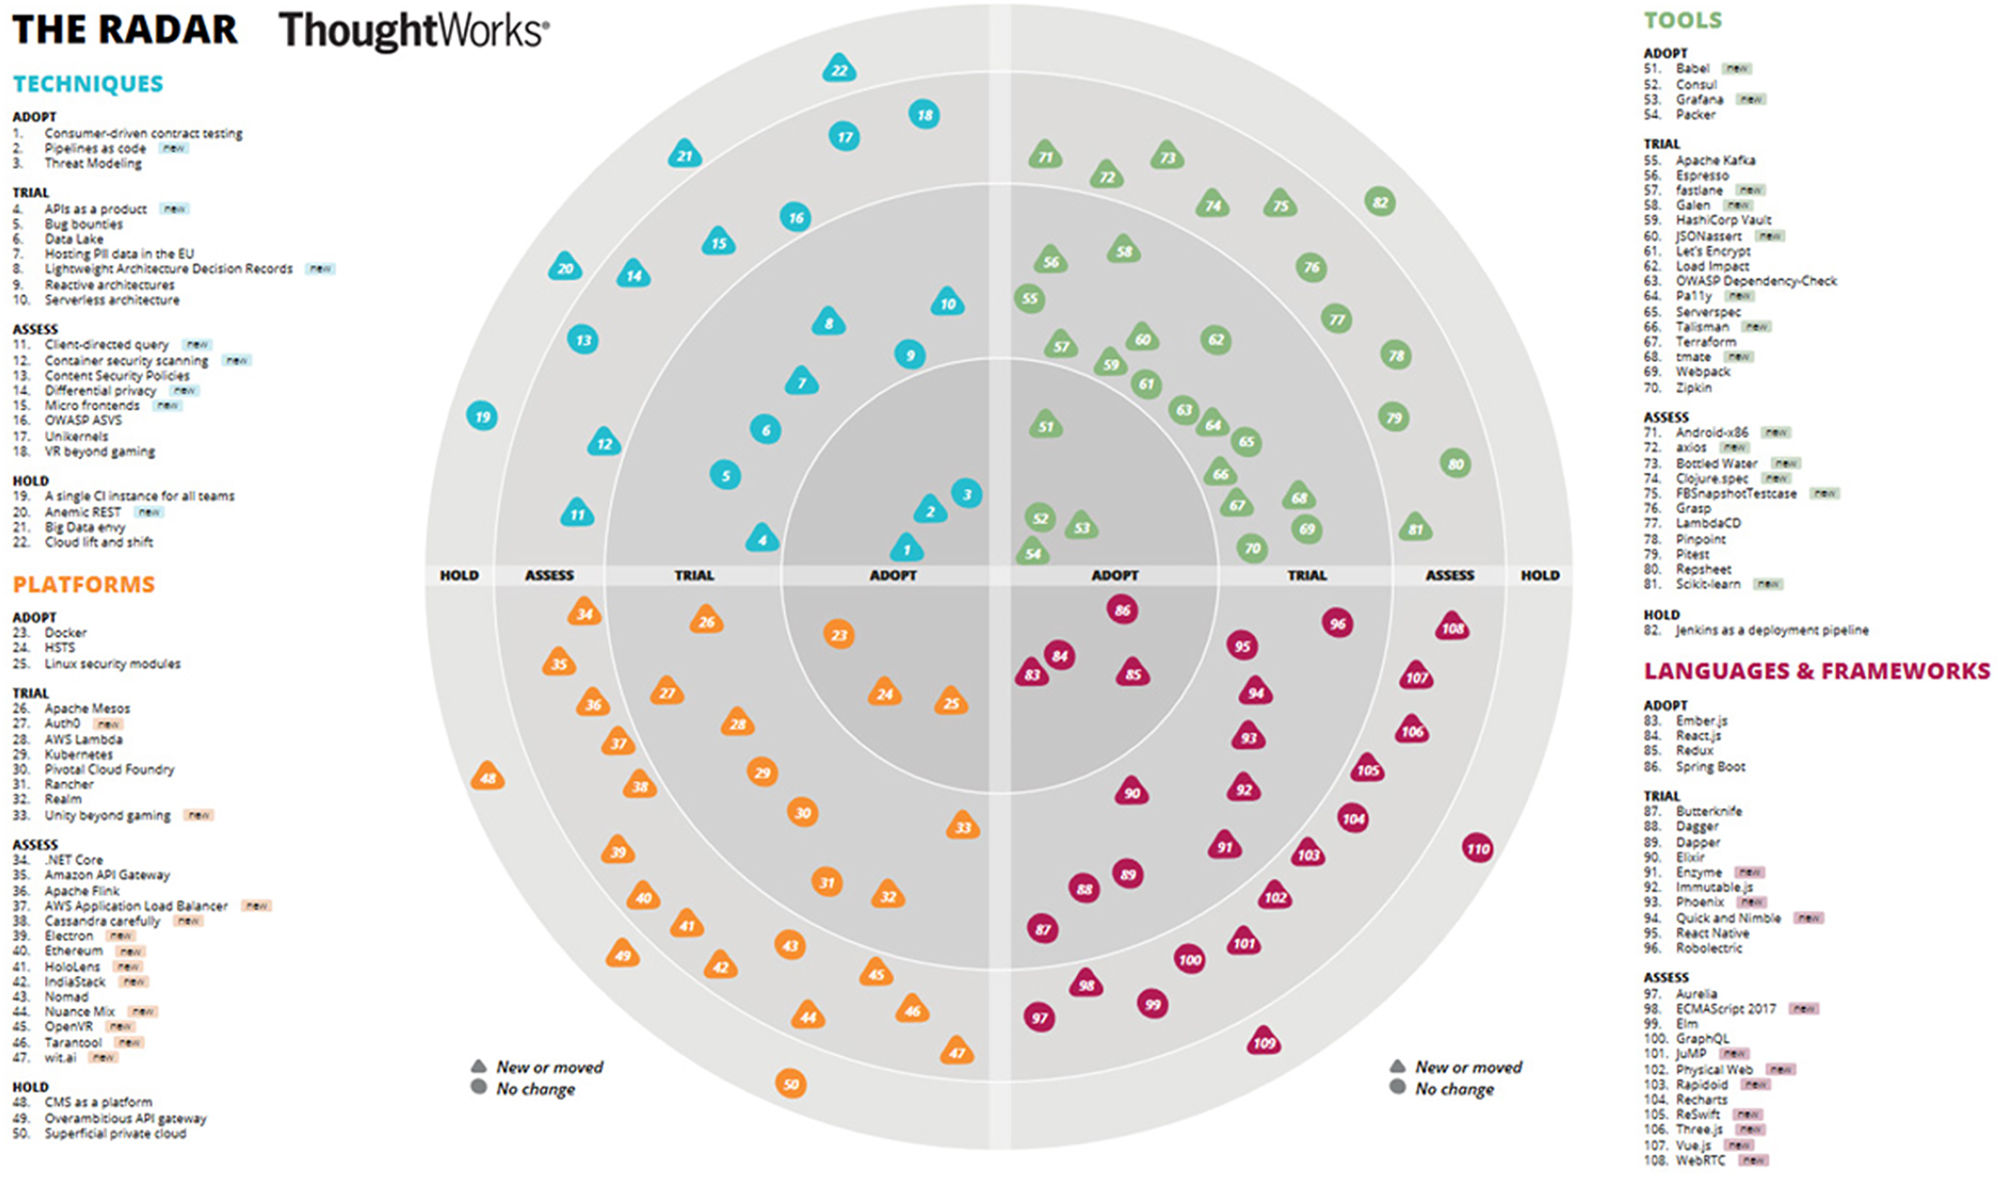 Figure 5: 
Full overview of technology radar from Thoughtworks [30].
